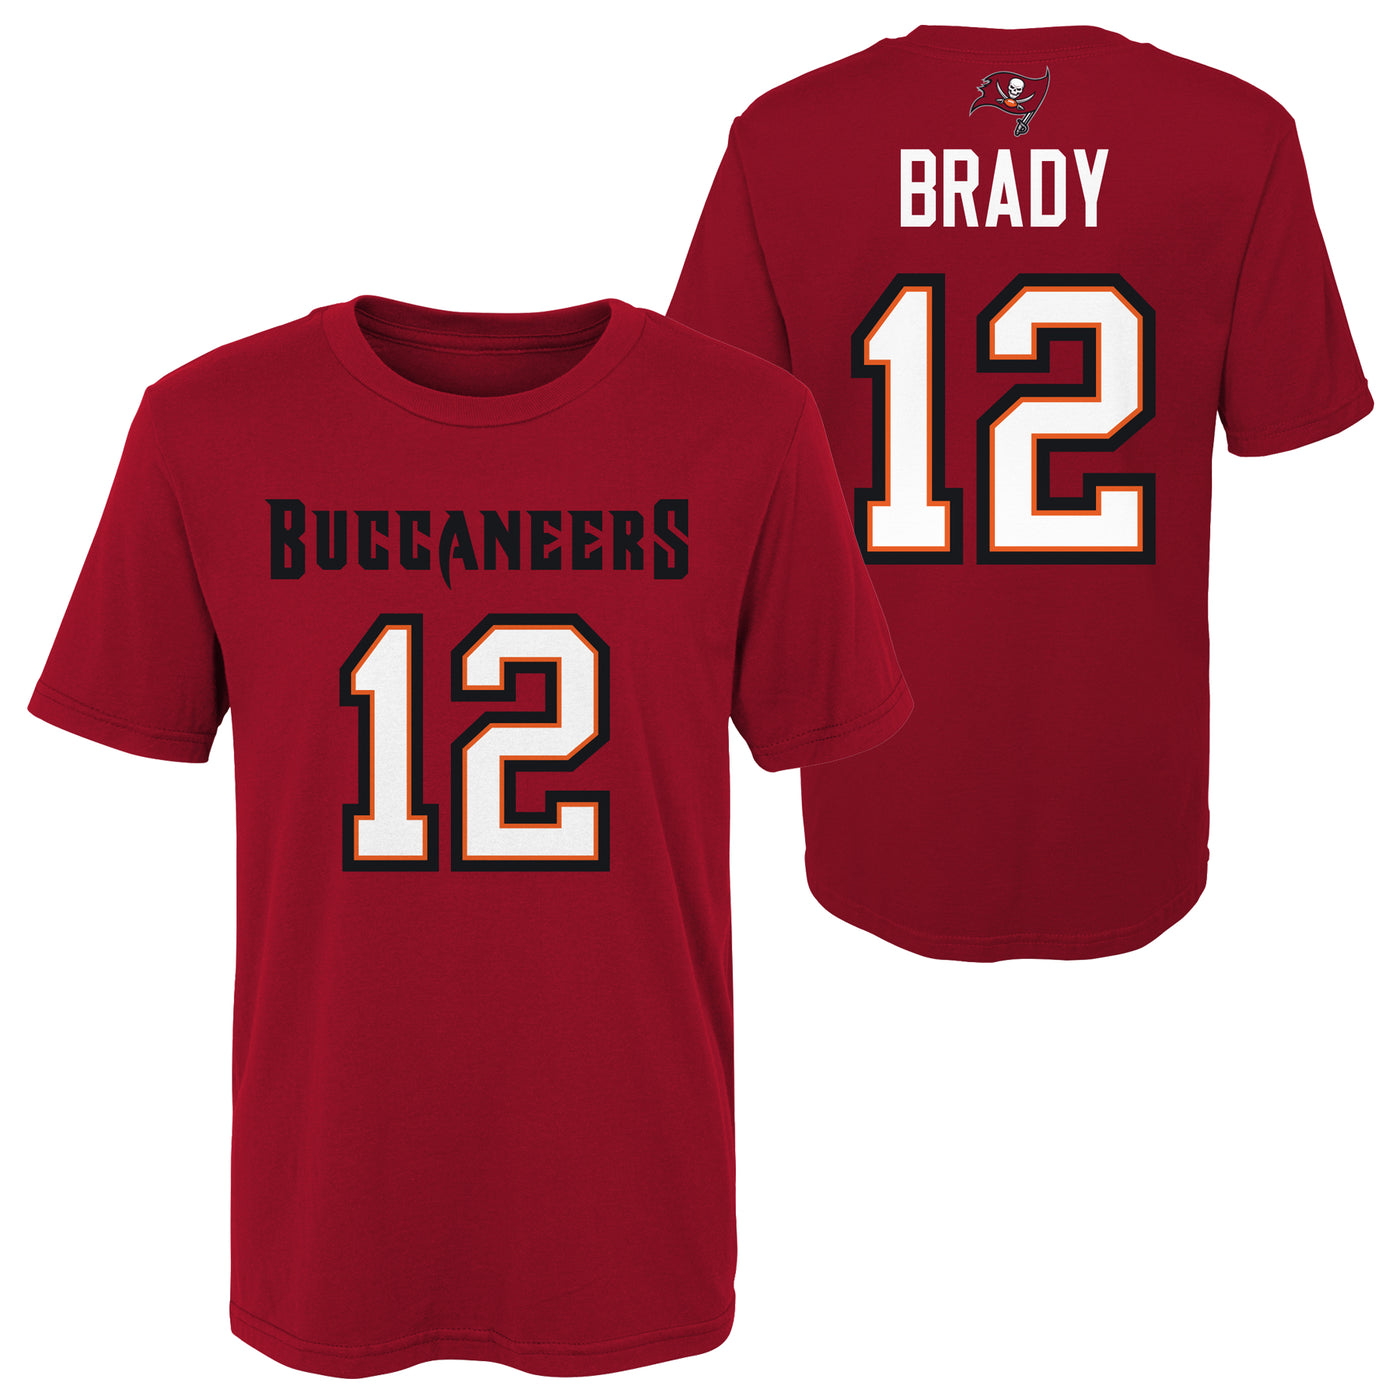 tampa bay buccaneers youth t shirt